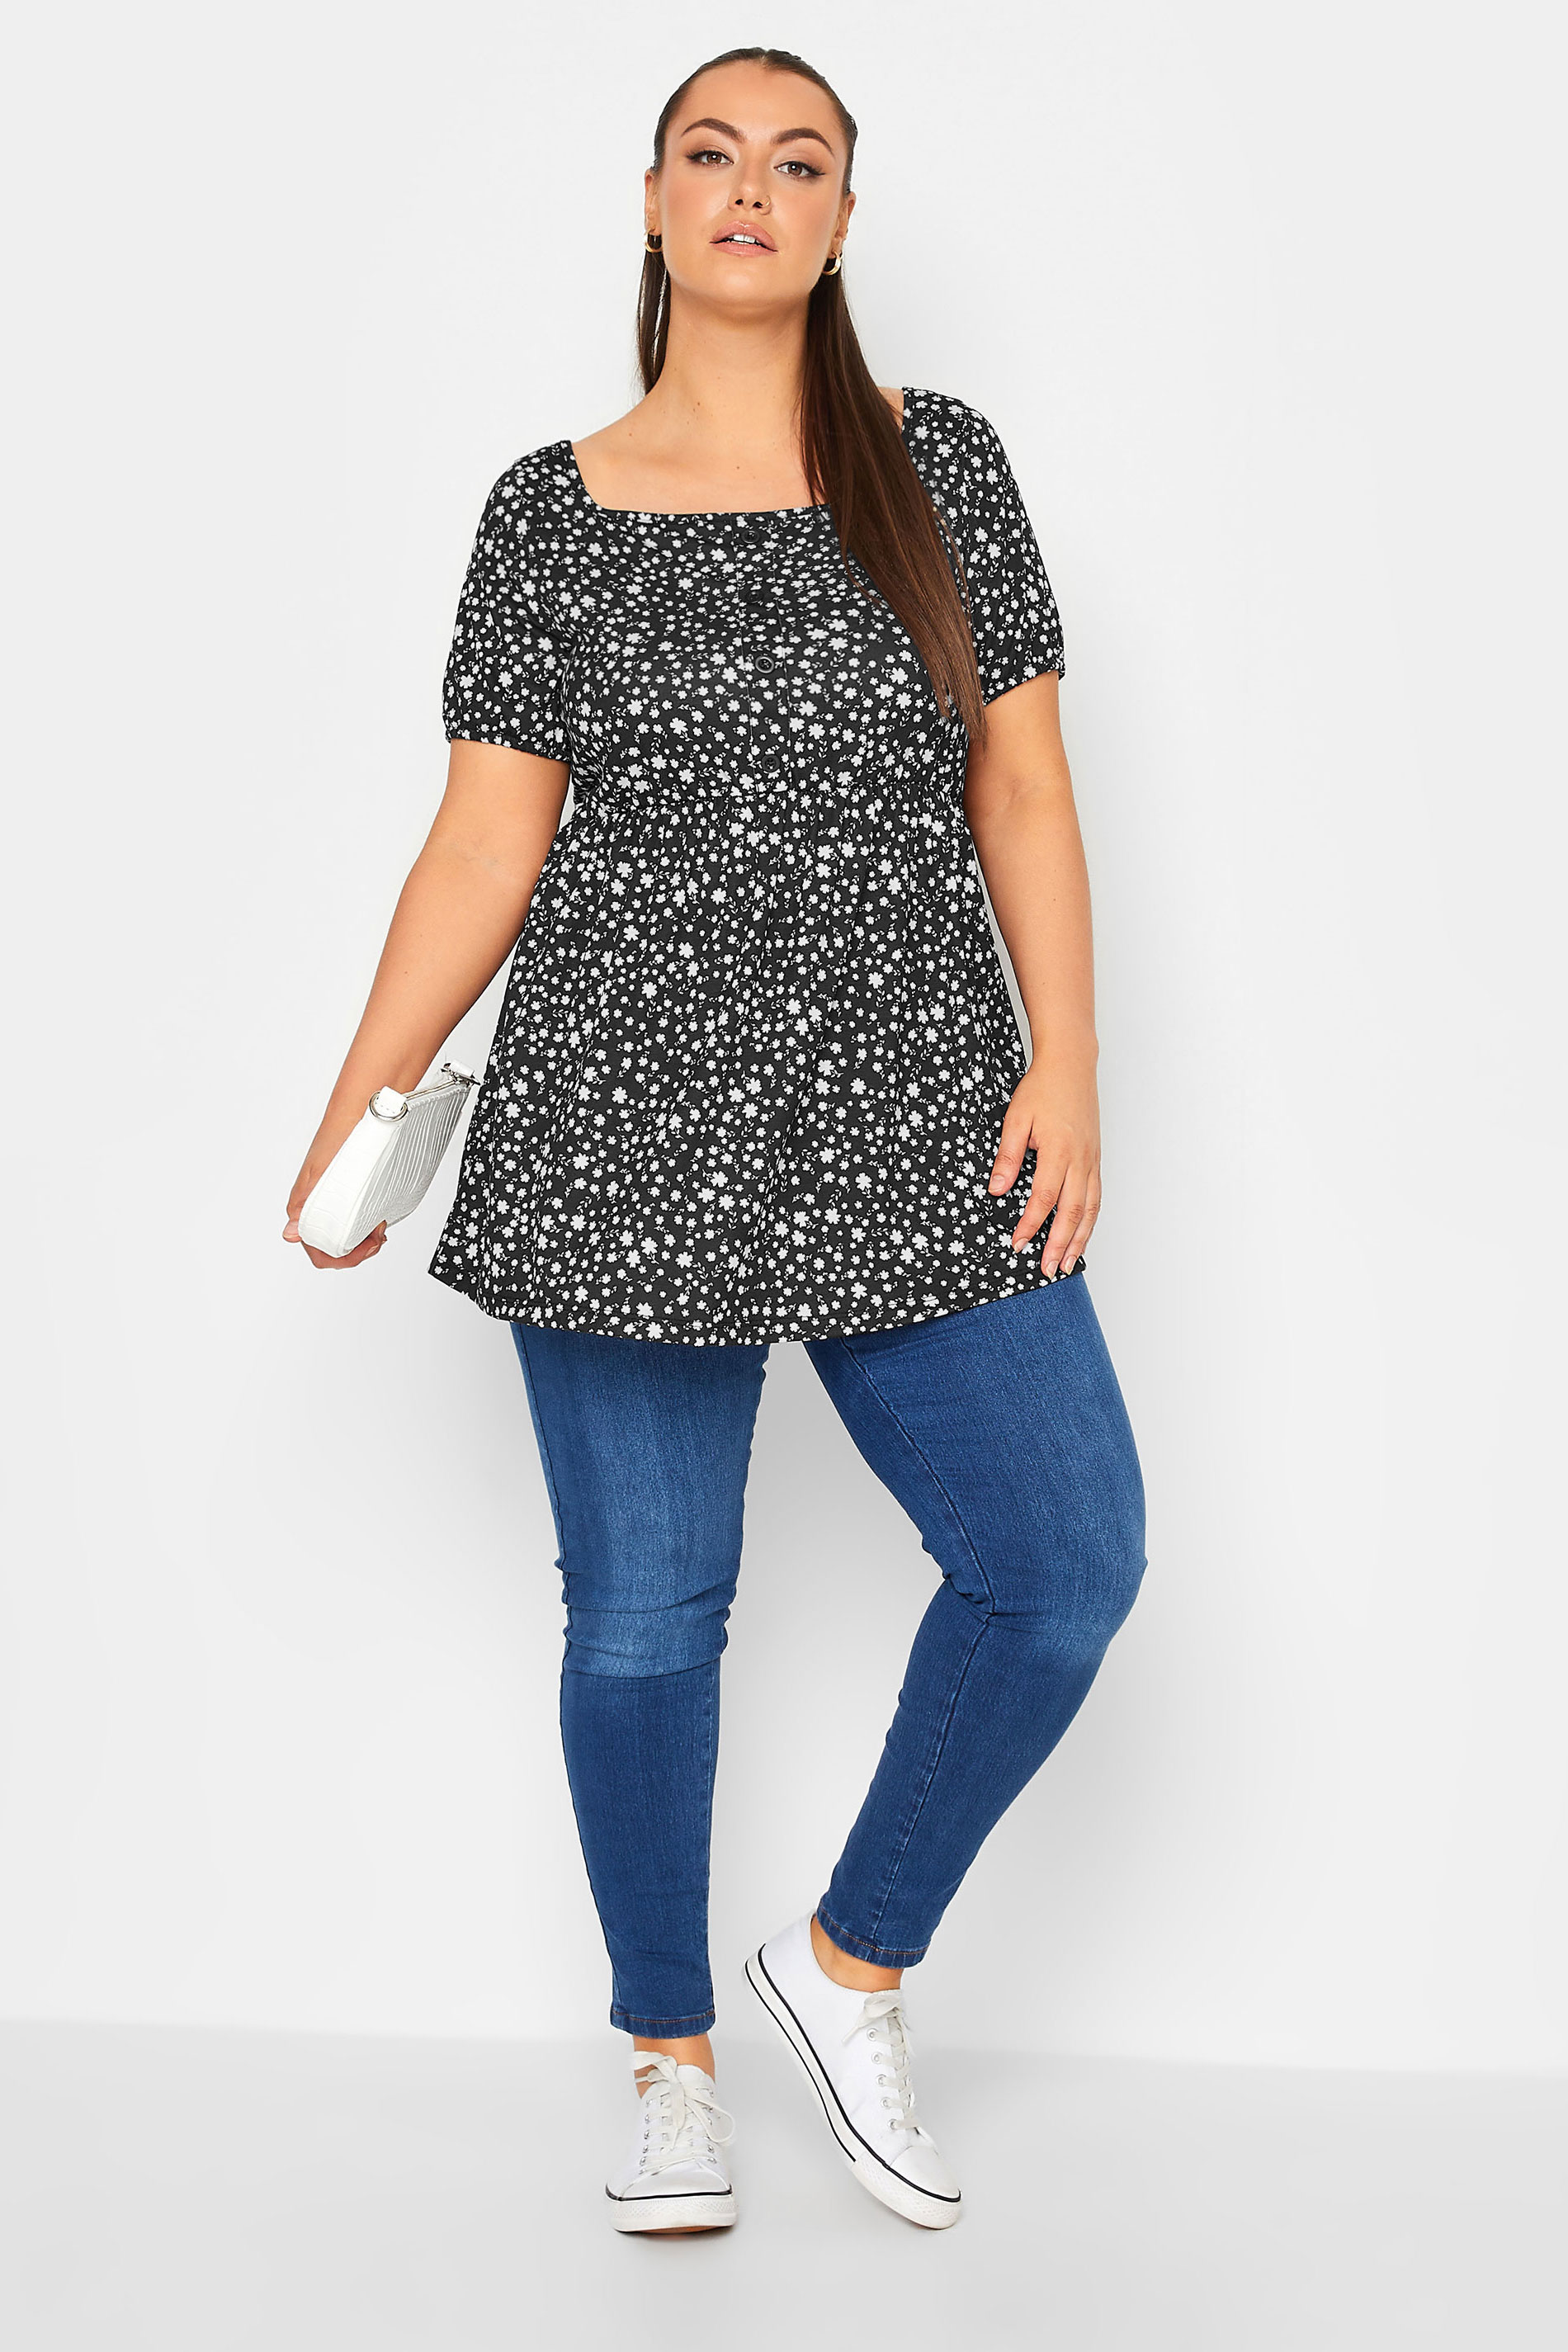 LIMITED COLLECTION Plus Size Black Floral Print Square Neck Top | Yours Clothing 2